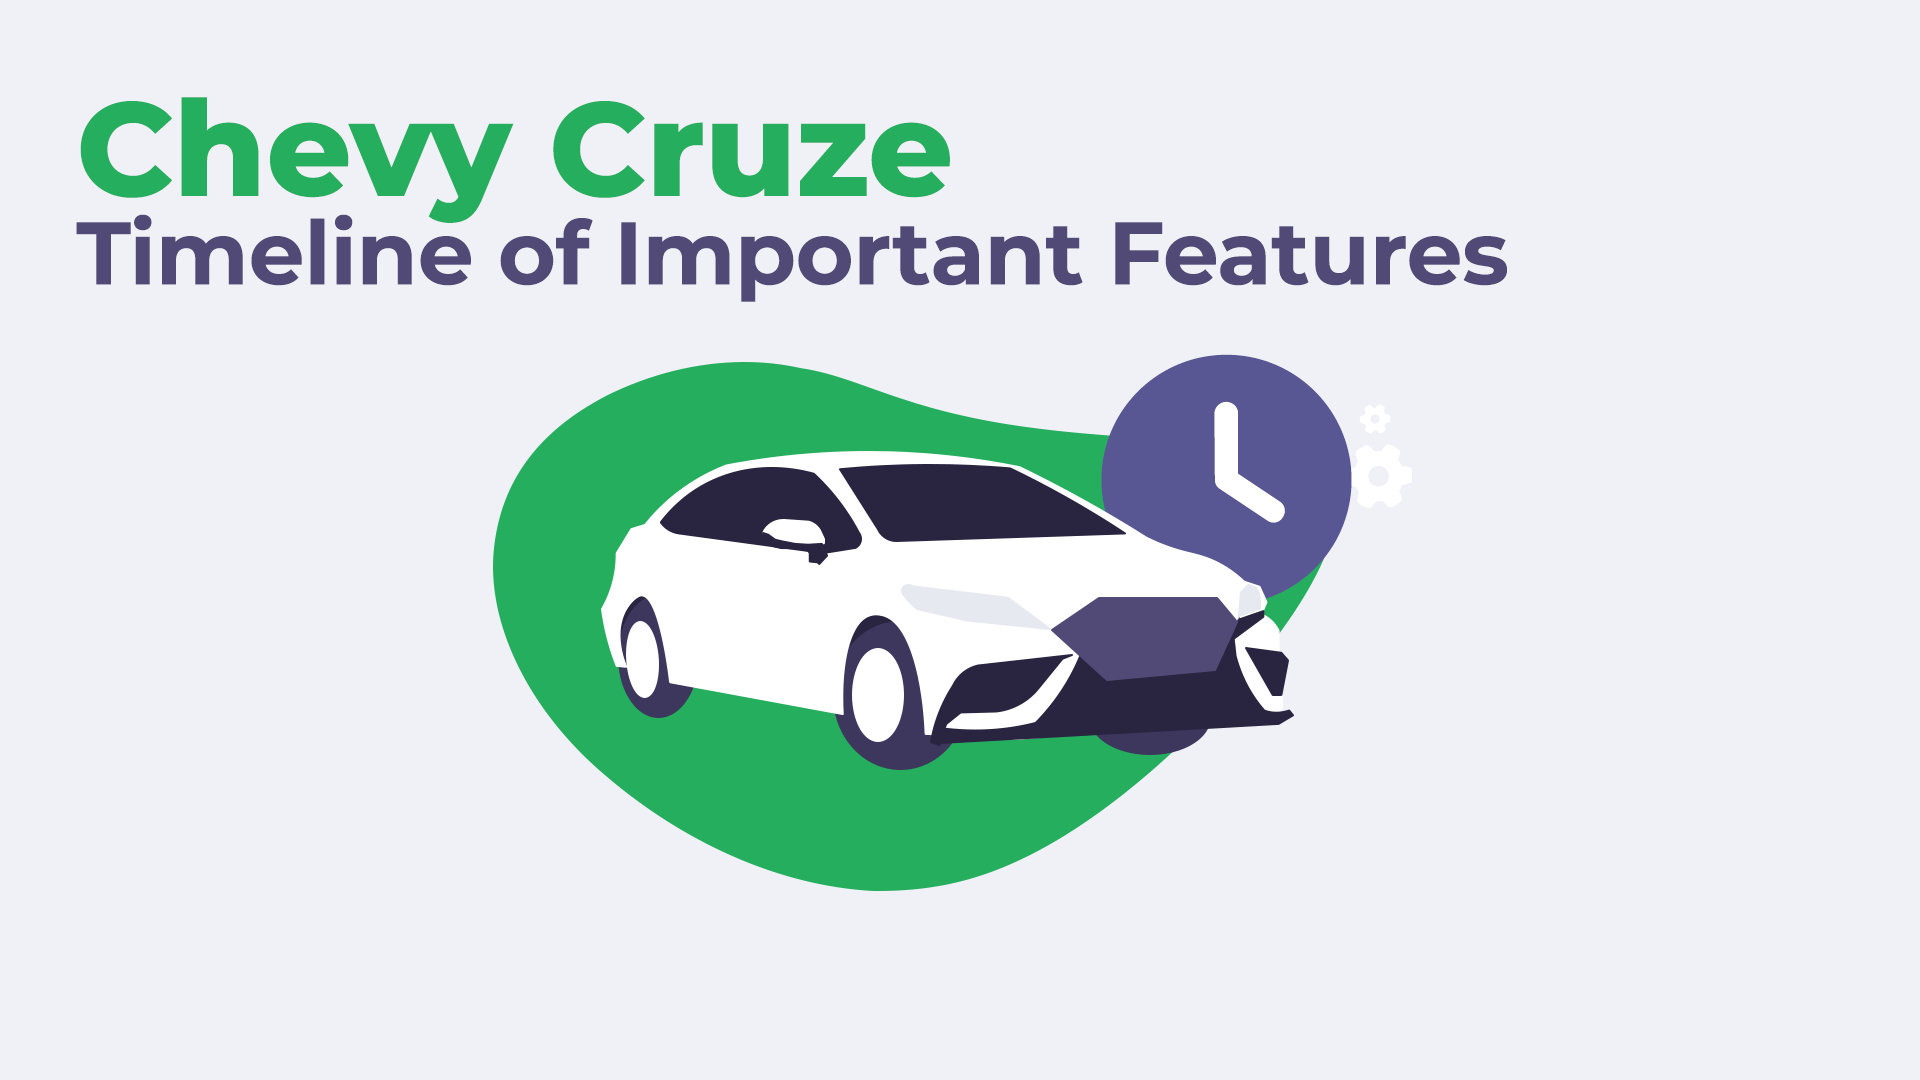 Chevrolet Cruze Timeline of Important features